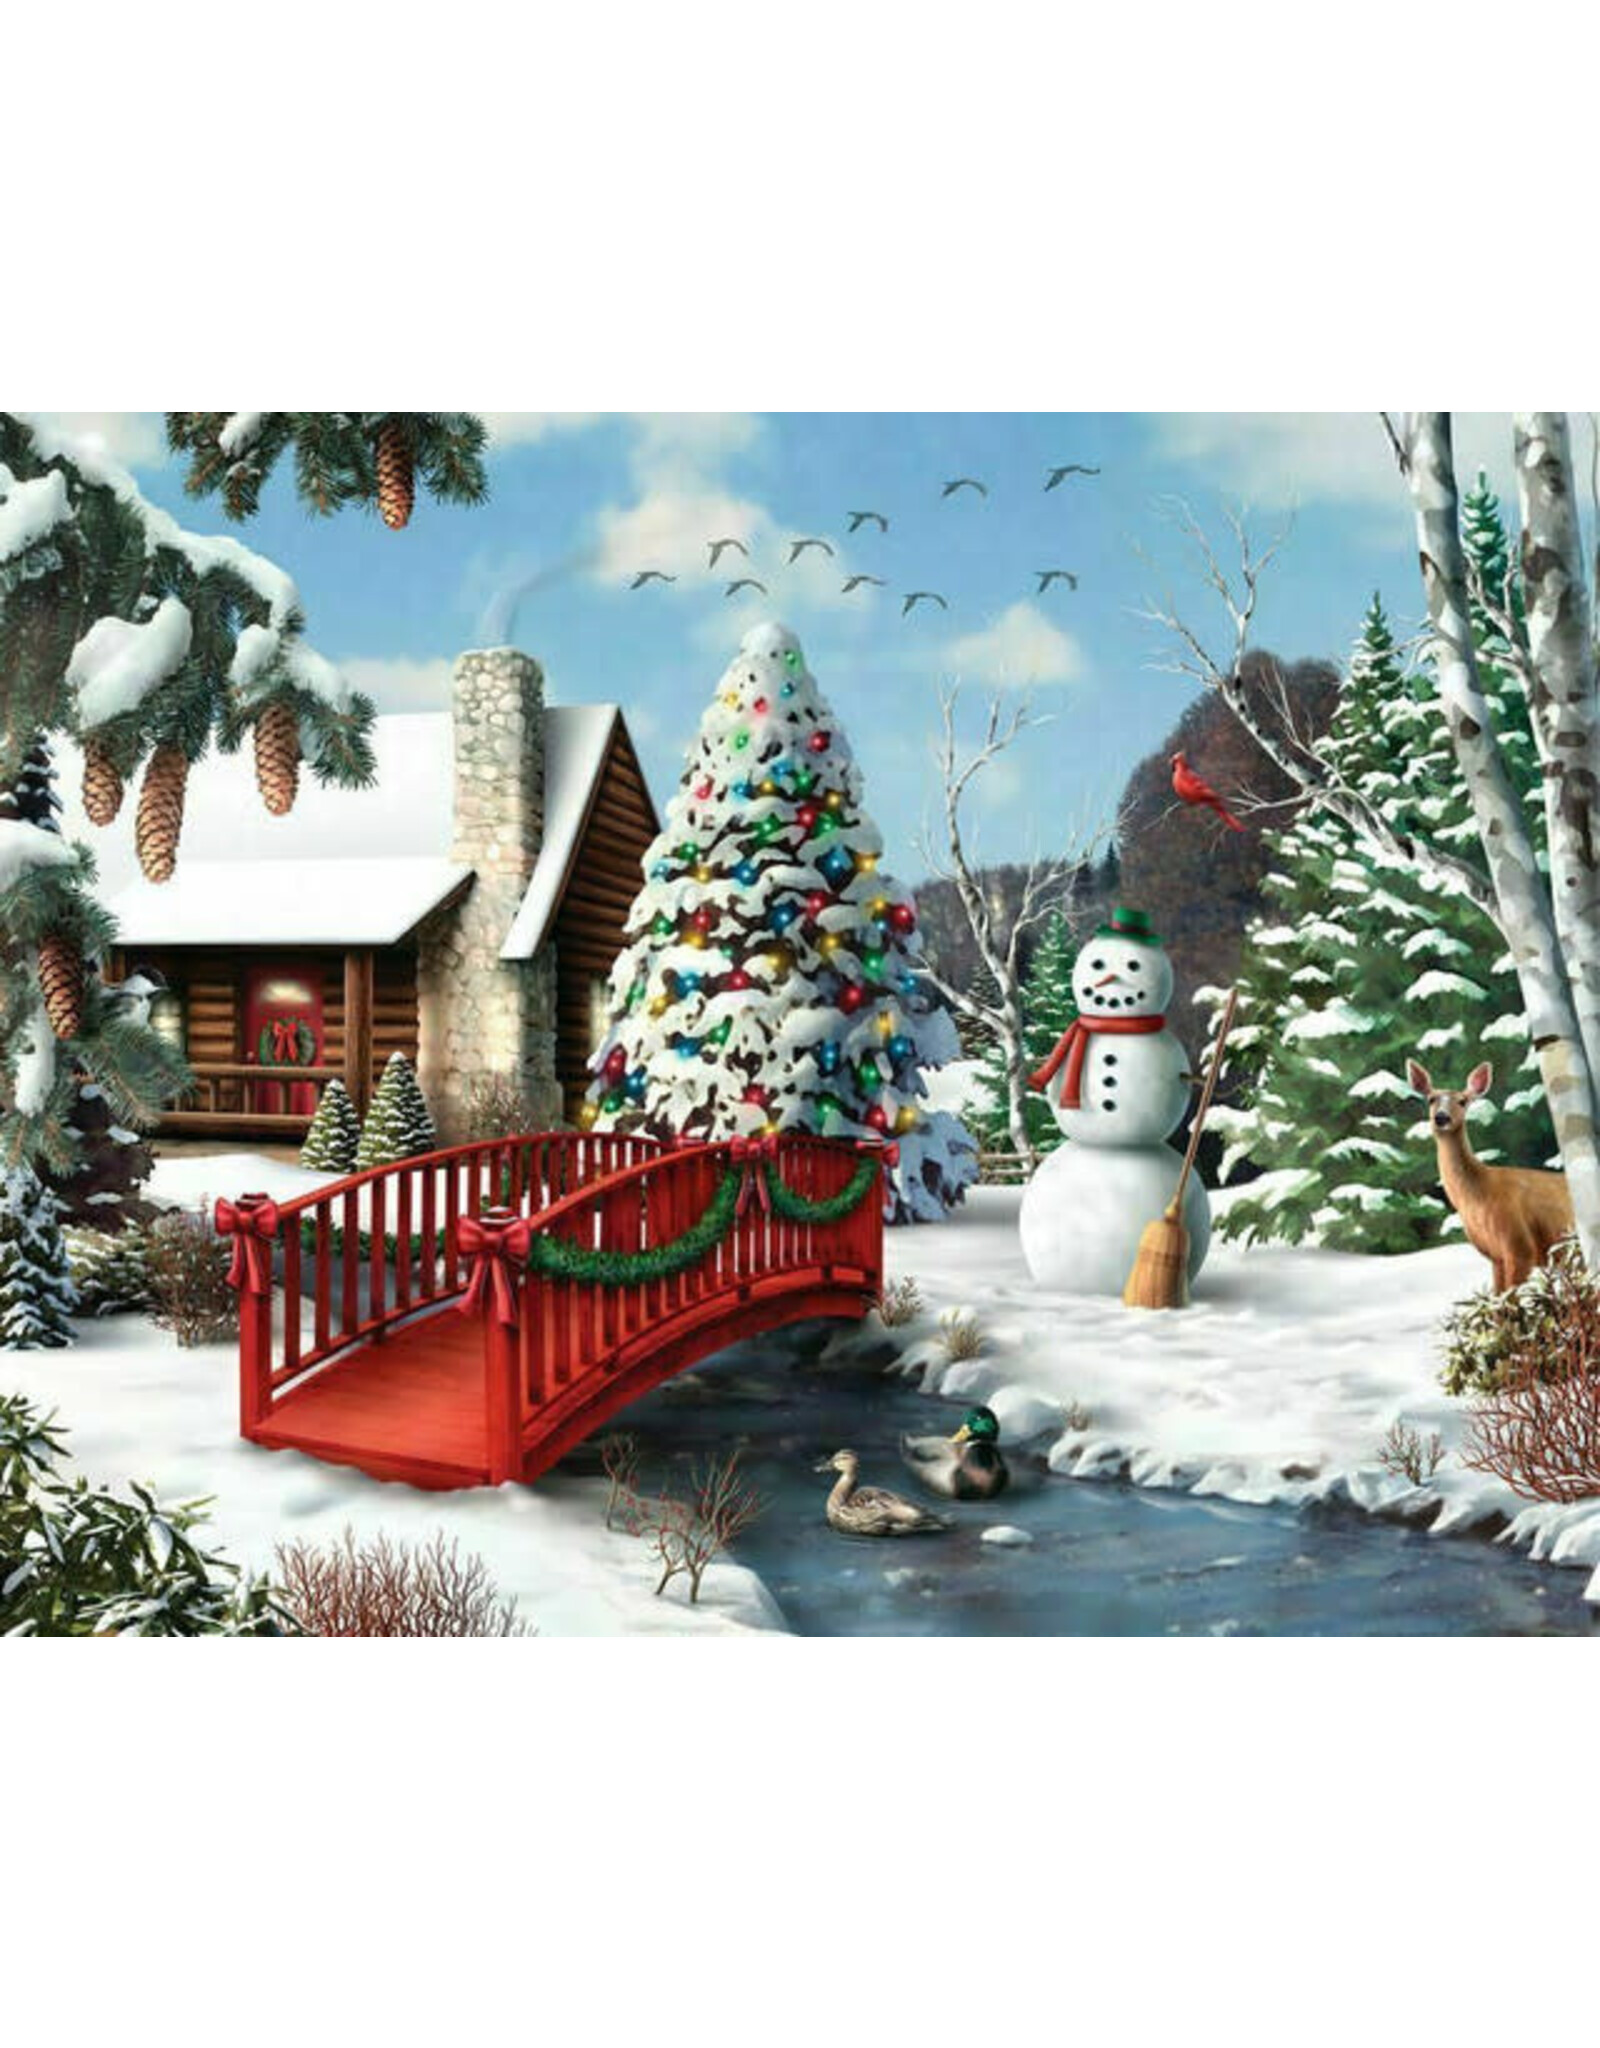 Winter's Home 500 Piece Jigsaw Puzzle